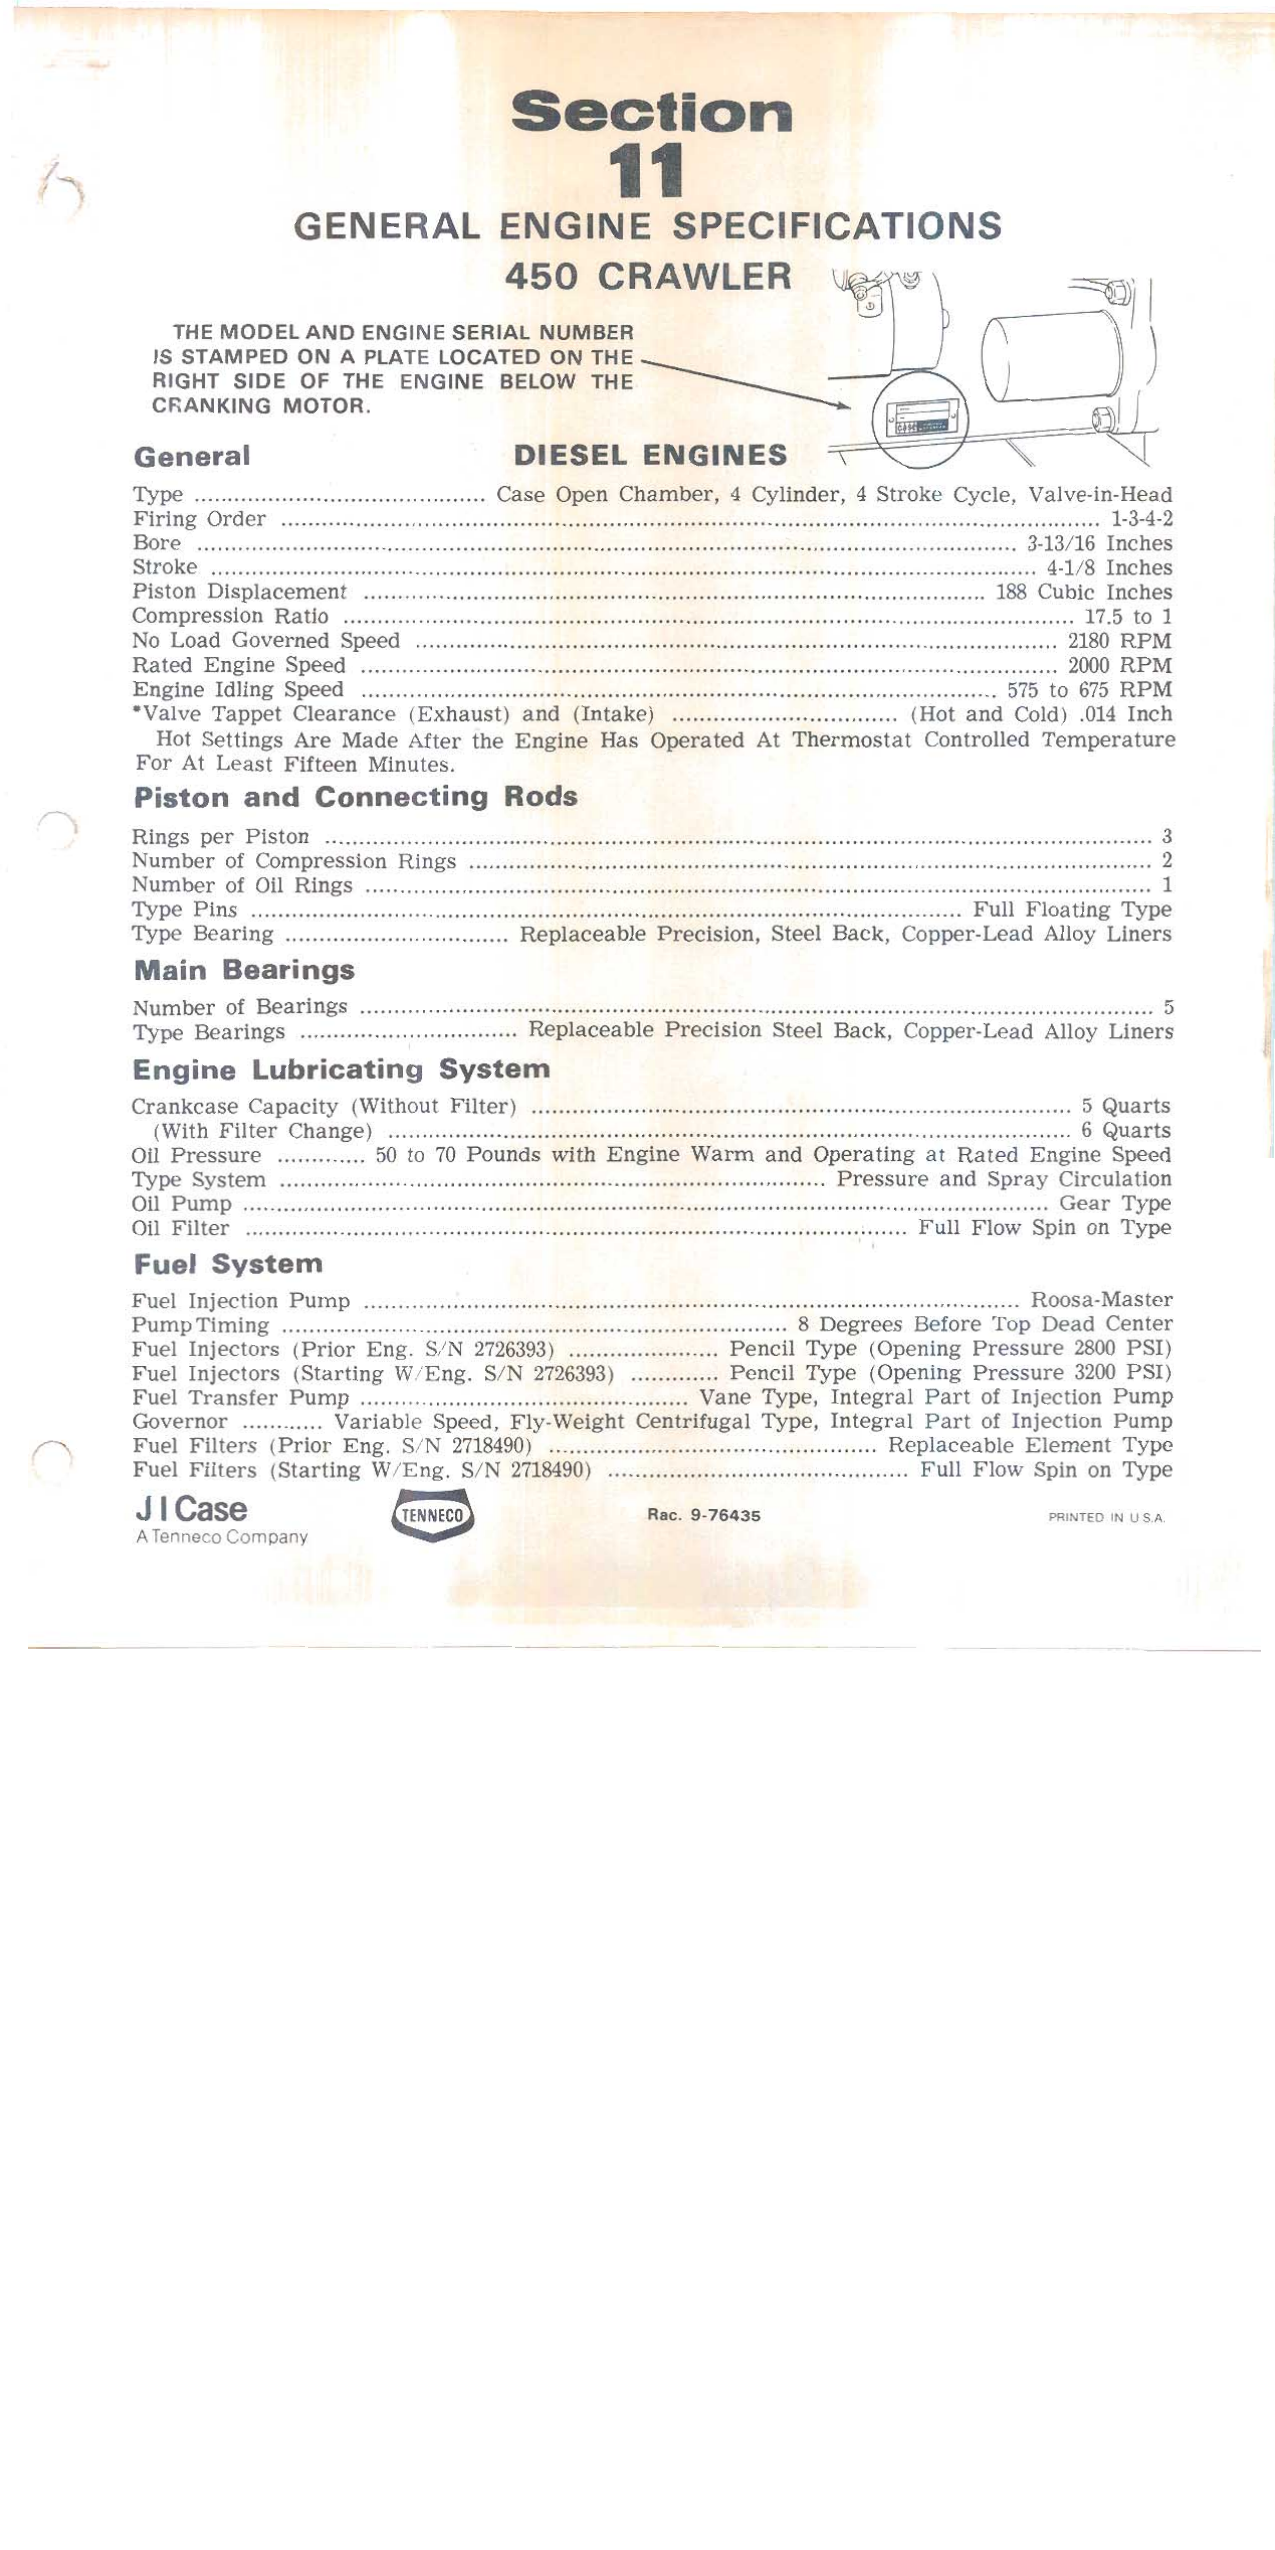 Case 450 tractor carwler service manual Preview image 4